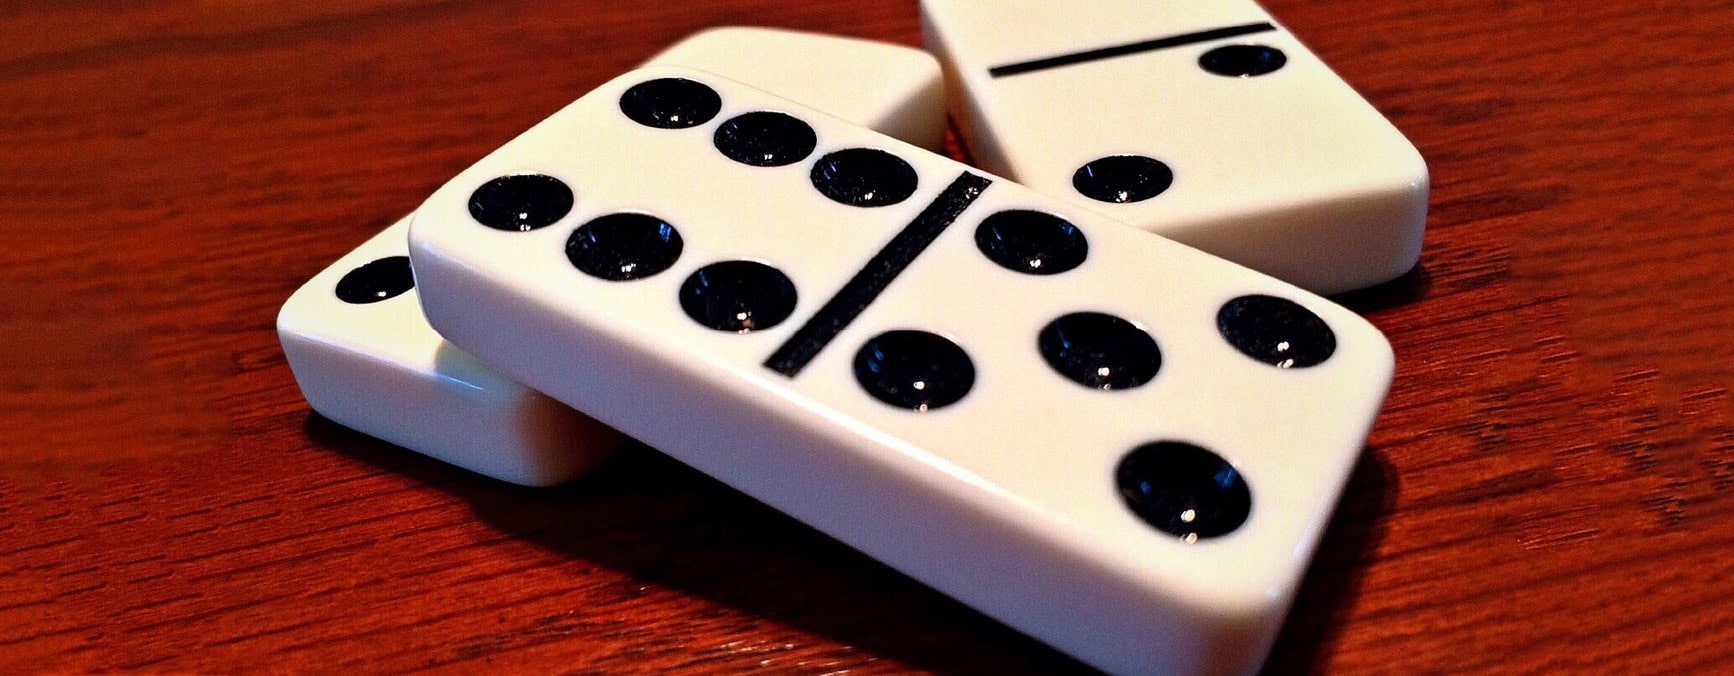 Dominoes on a teak surface.